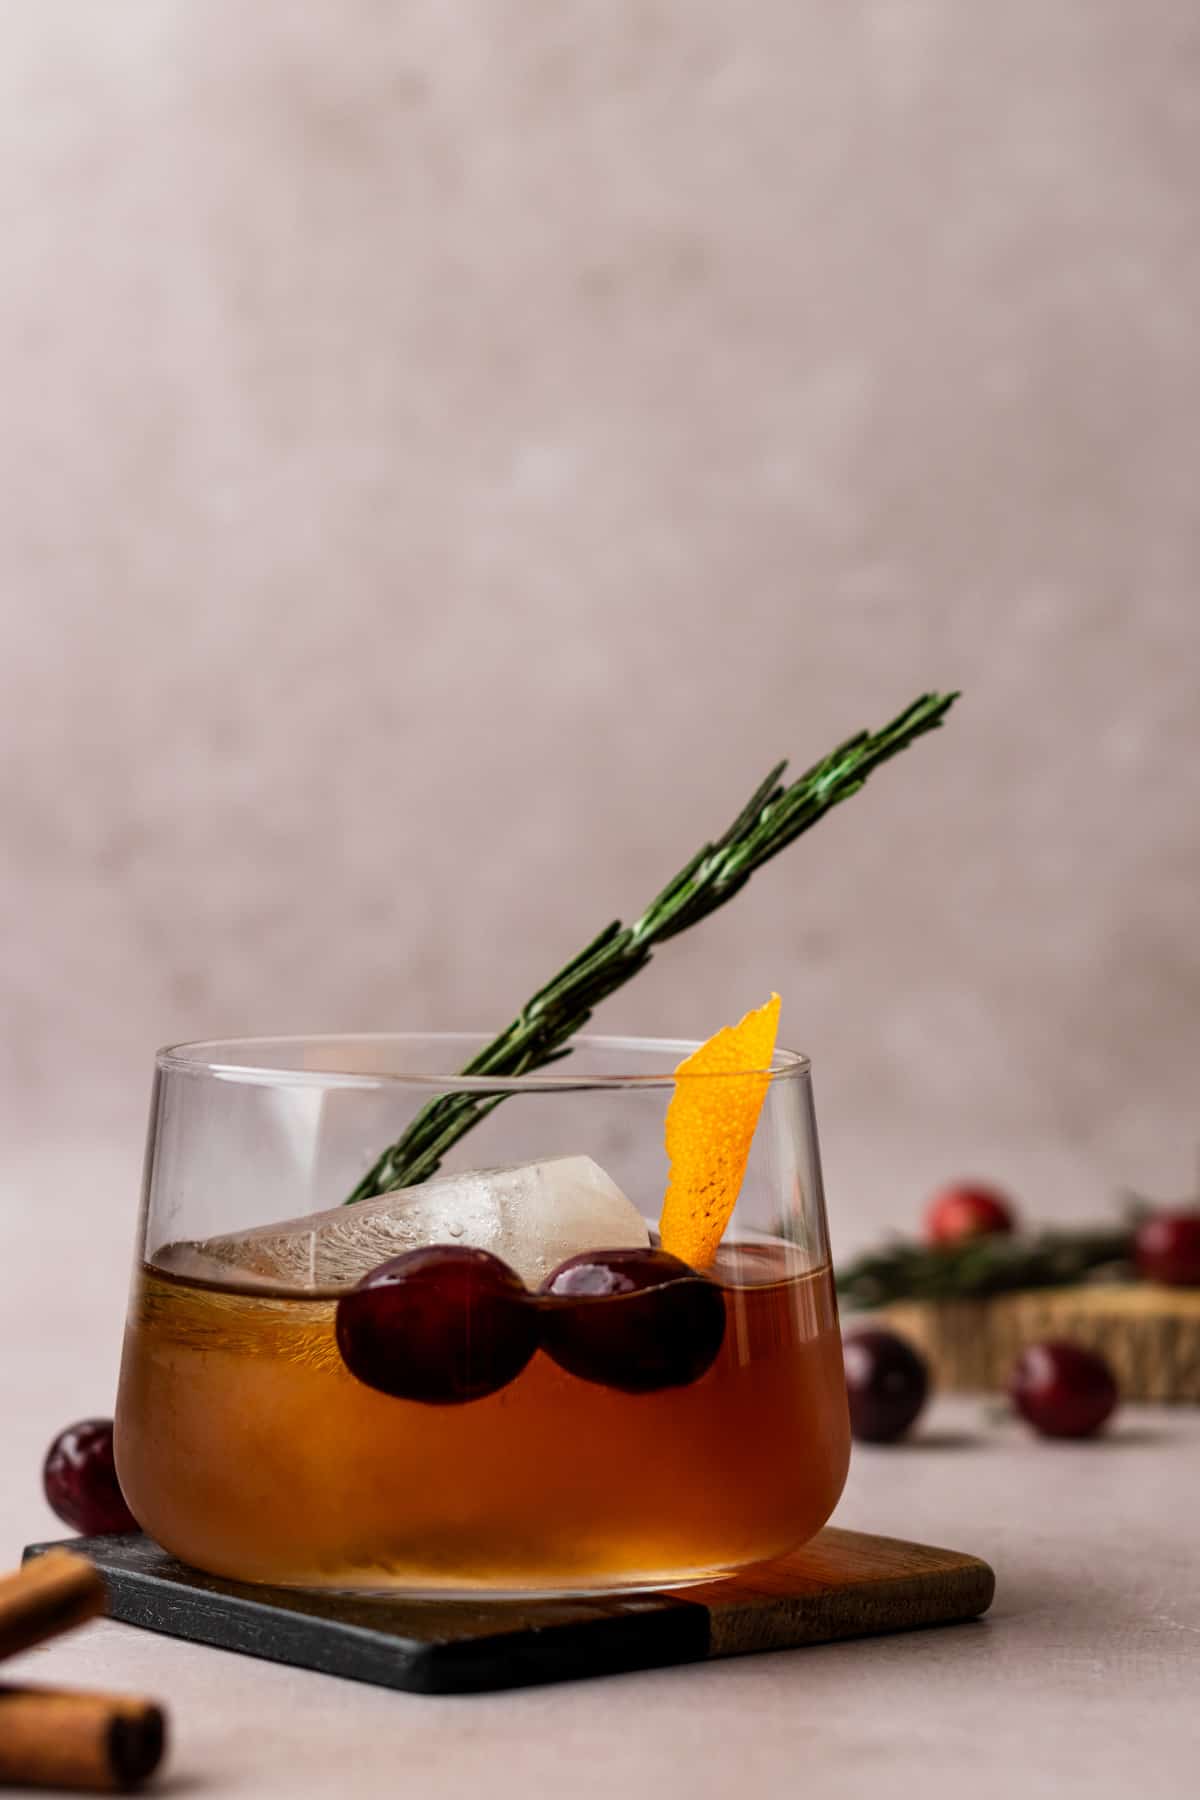 Winter old fashioned cocktail on a square coaster garnished with cranberries, rosemary and orange peel.